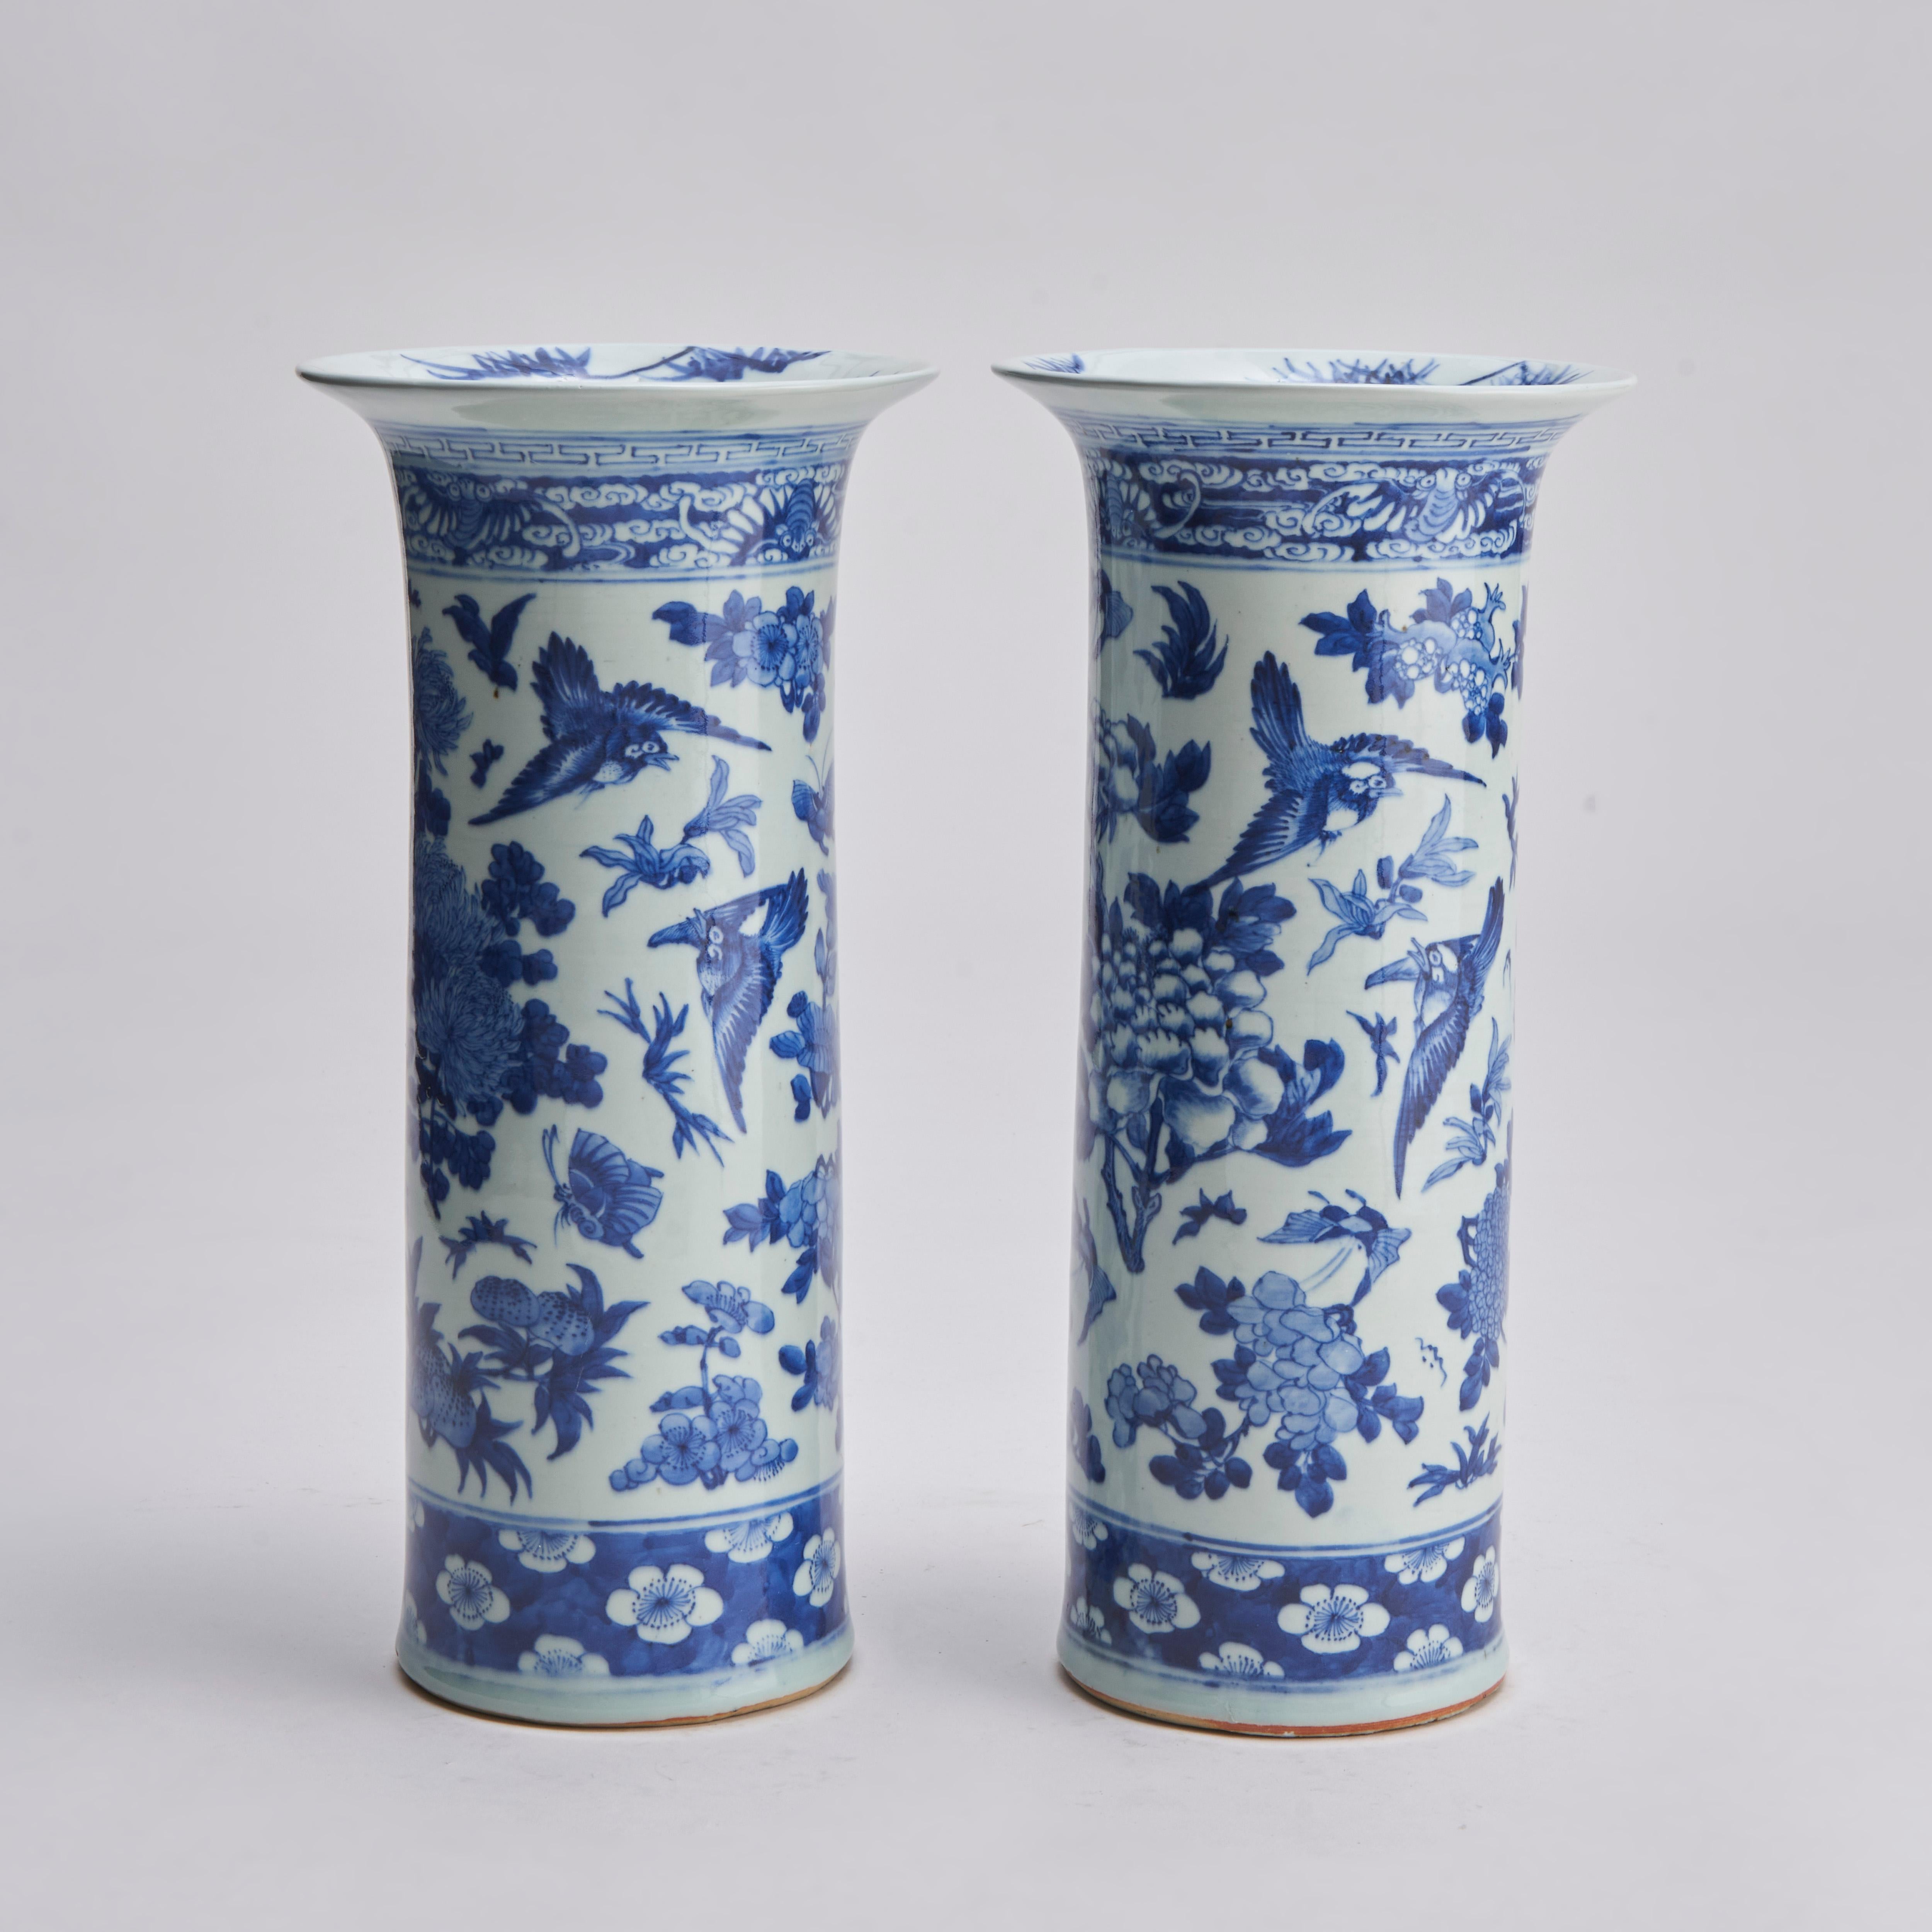 A pair of 19th century Chinese blue and white flare-rimmed sleeve vases with decoration of many flowers including peonies and hydrangeas. Surrounded by butterflies and song-birds, the foot with a hawthorn blossom patten, the top with a panel of bats